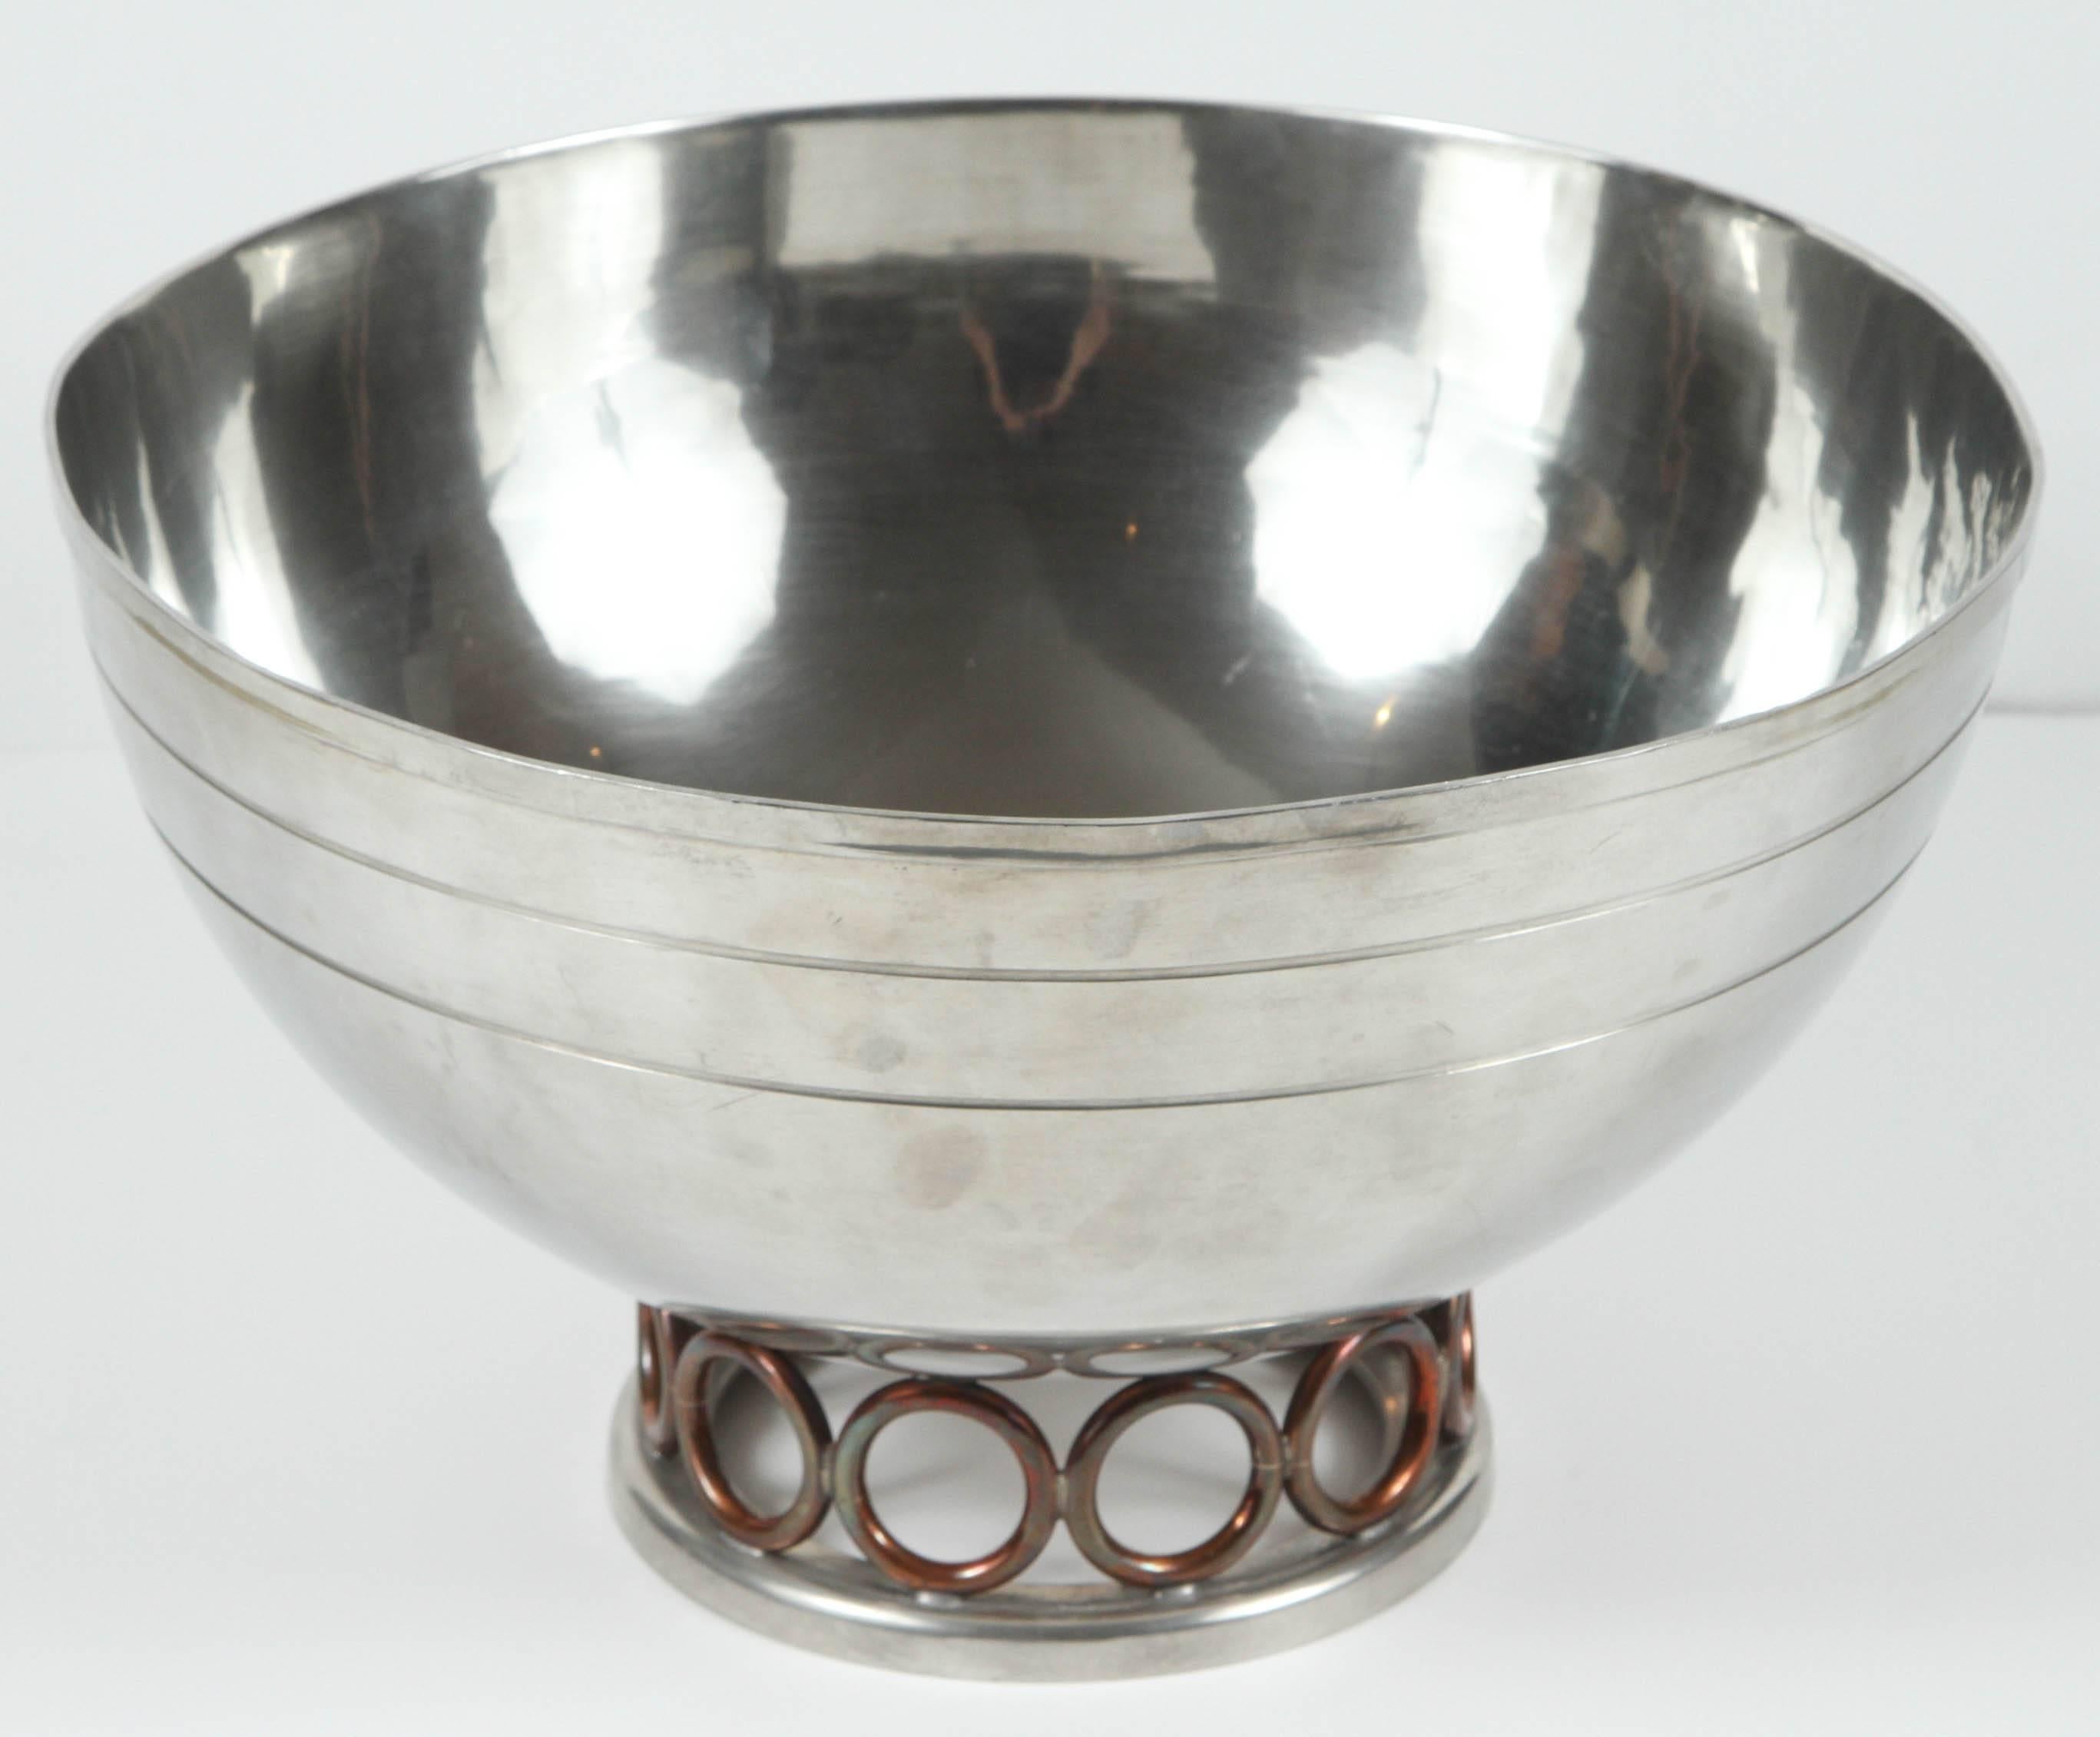 North American Pewter Bowl by Porter Blanchard